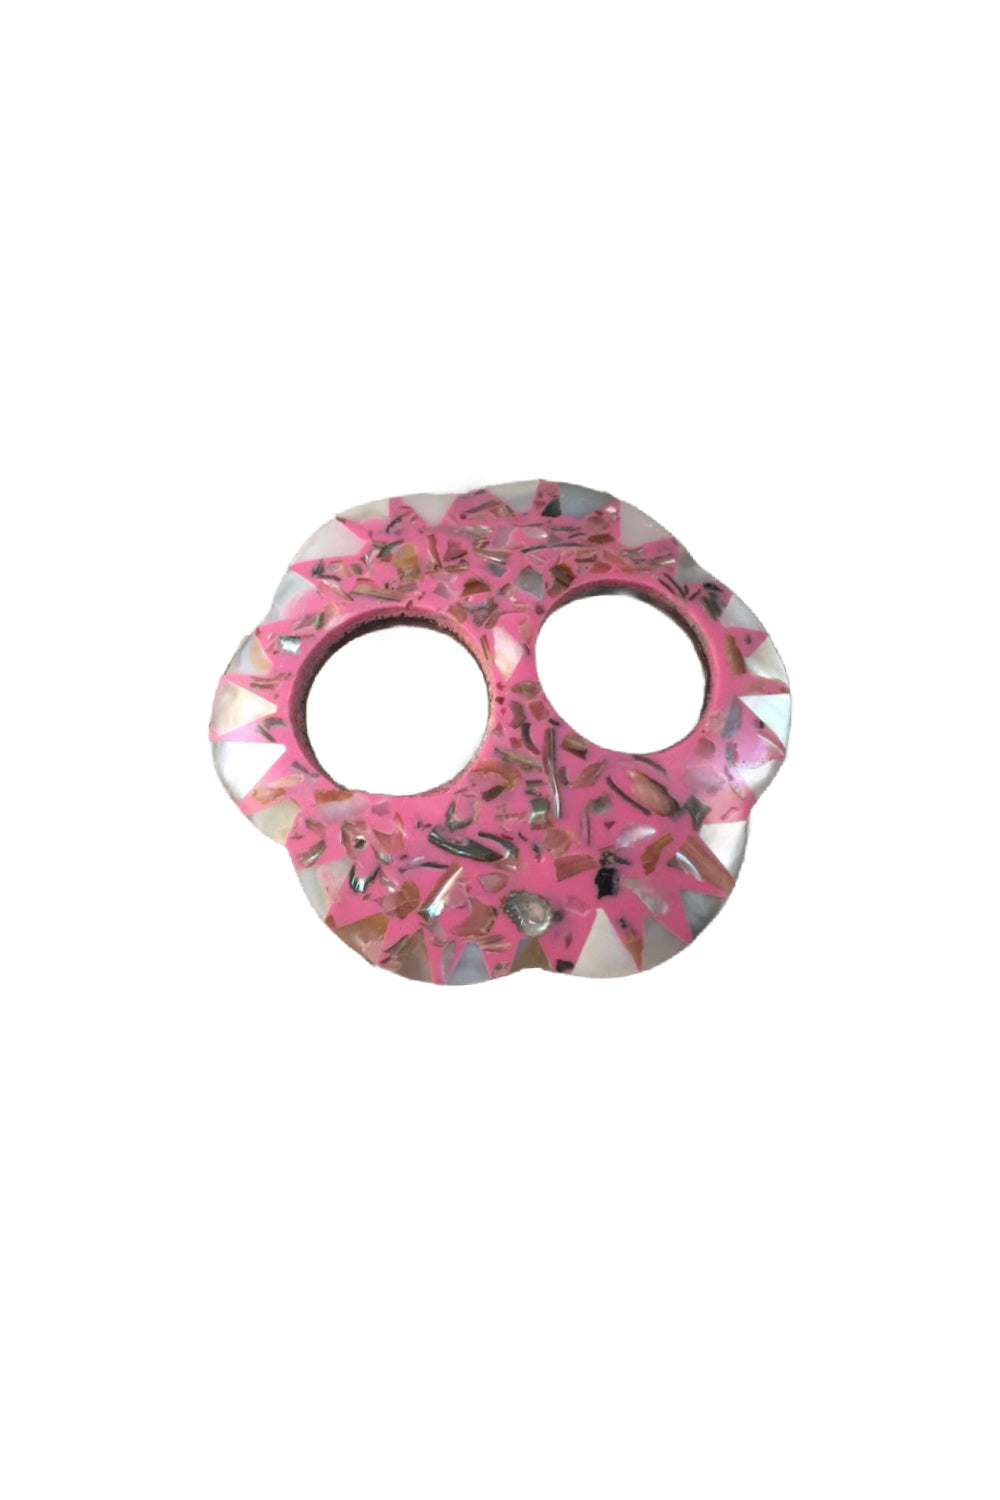 sarong-buckle-coconut-shell-pink-flower